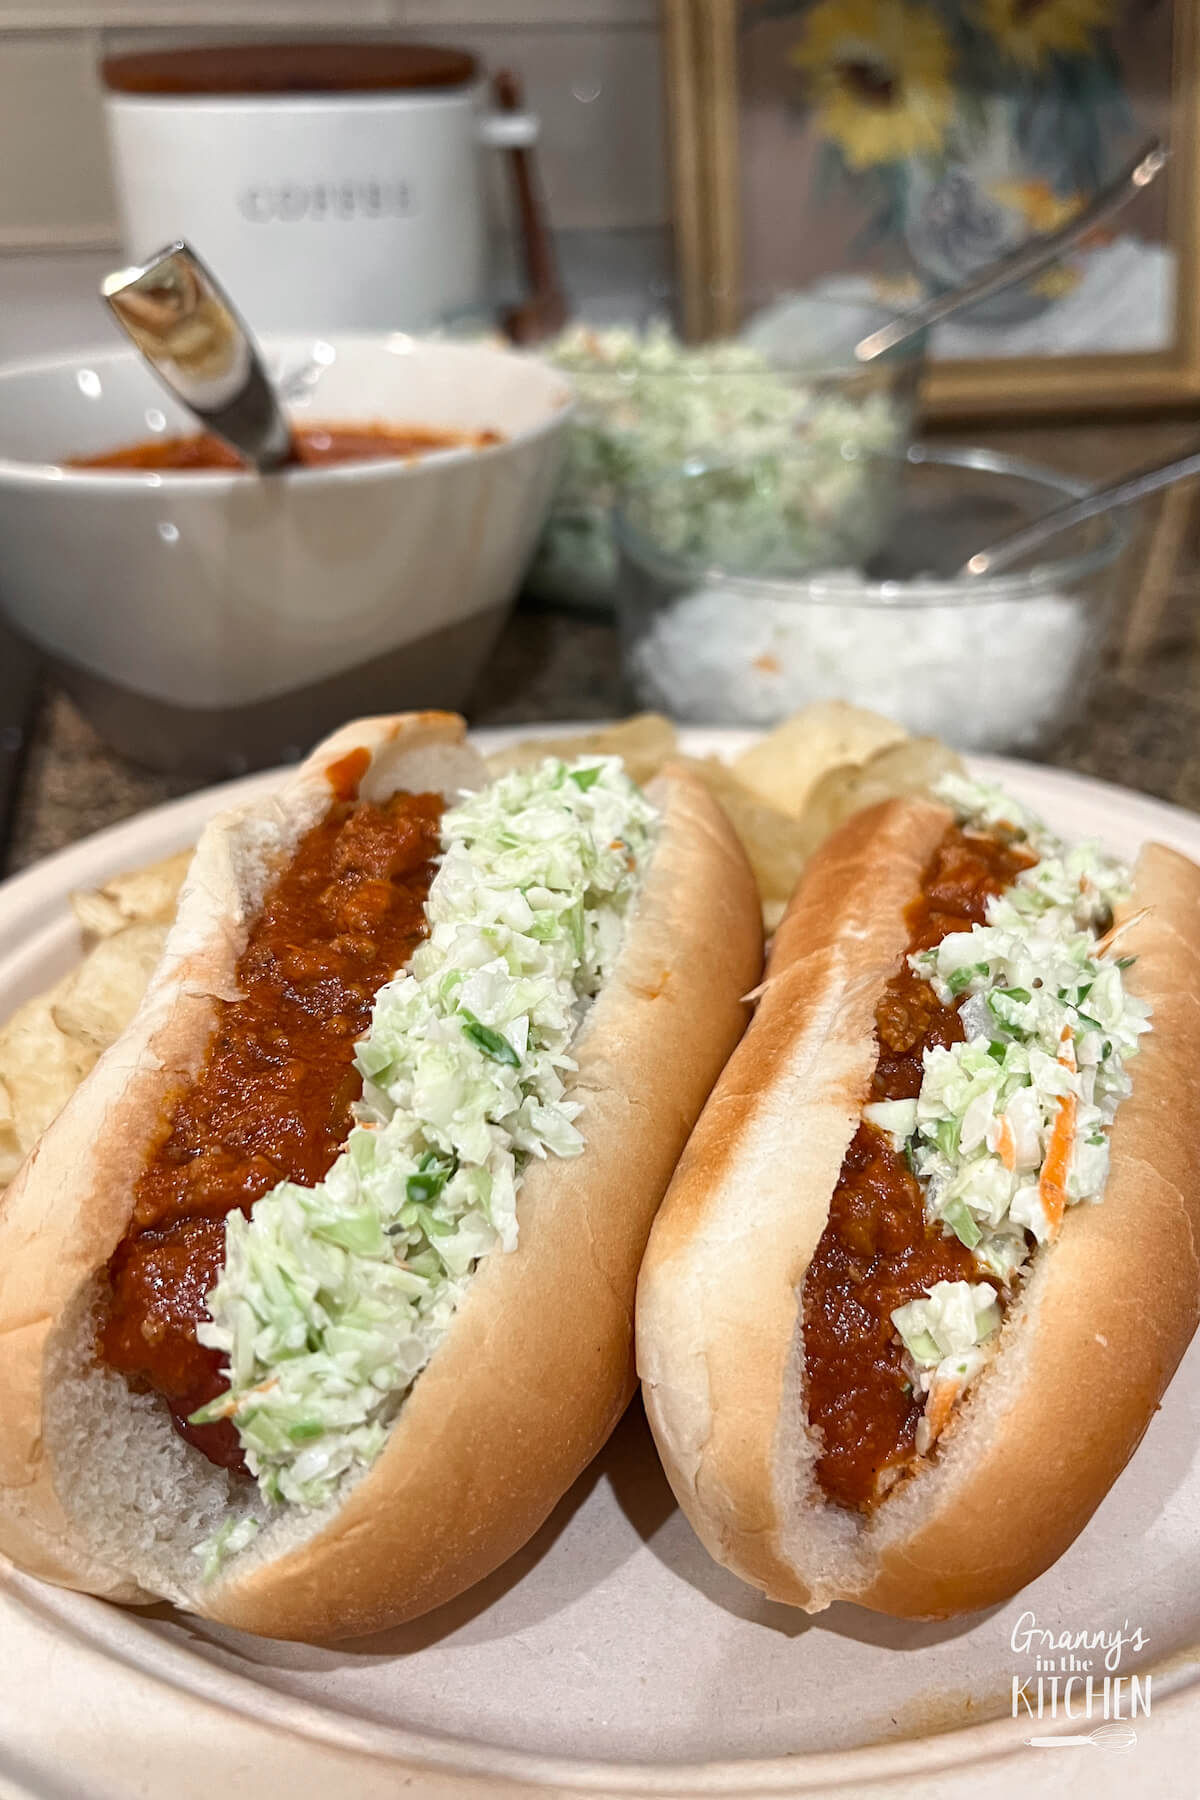 two West Virginia hot dogs on a paper plate, topped with chili and coleslaw.